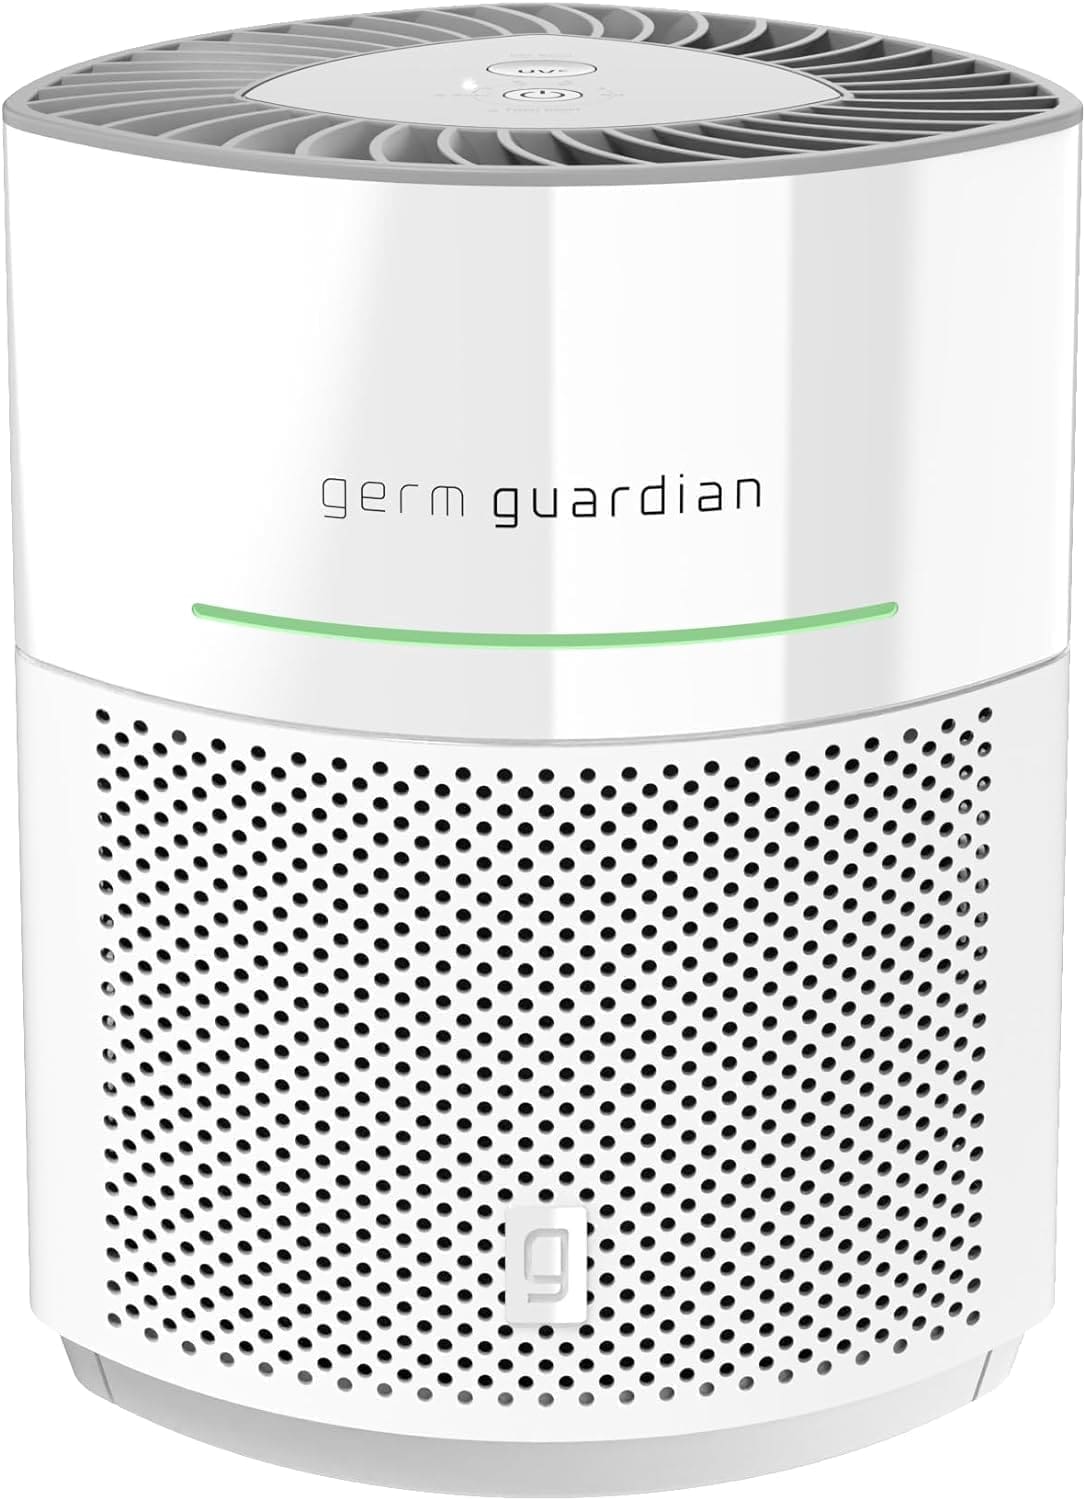 GermGuardian AirSafe+ Intelligent Air Purifier Review